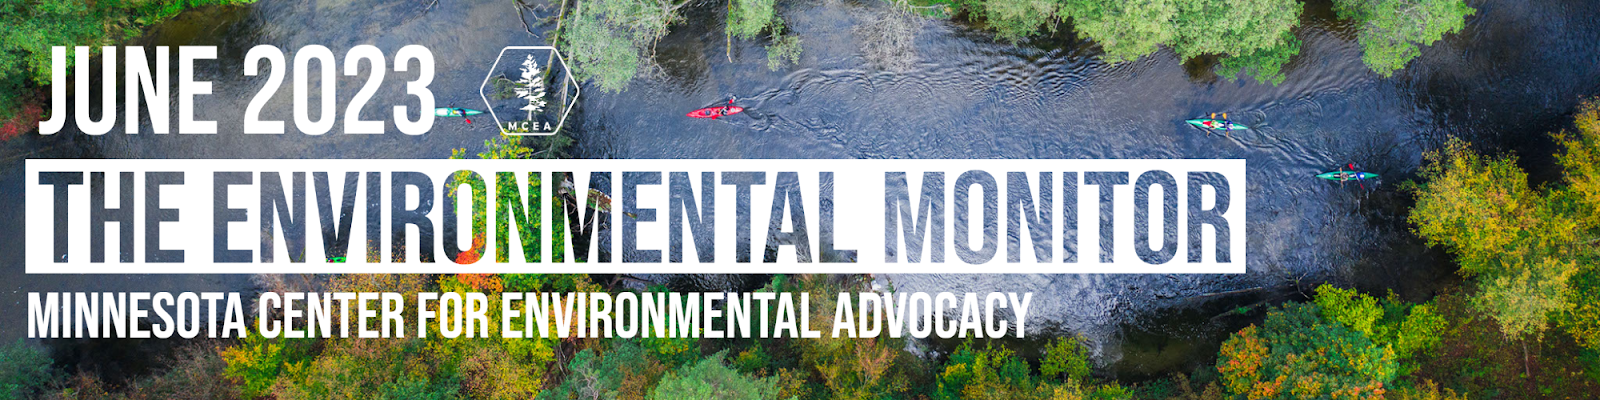 words environmental monitor June over an aerial photo of kayakers in a river